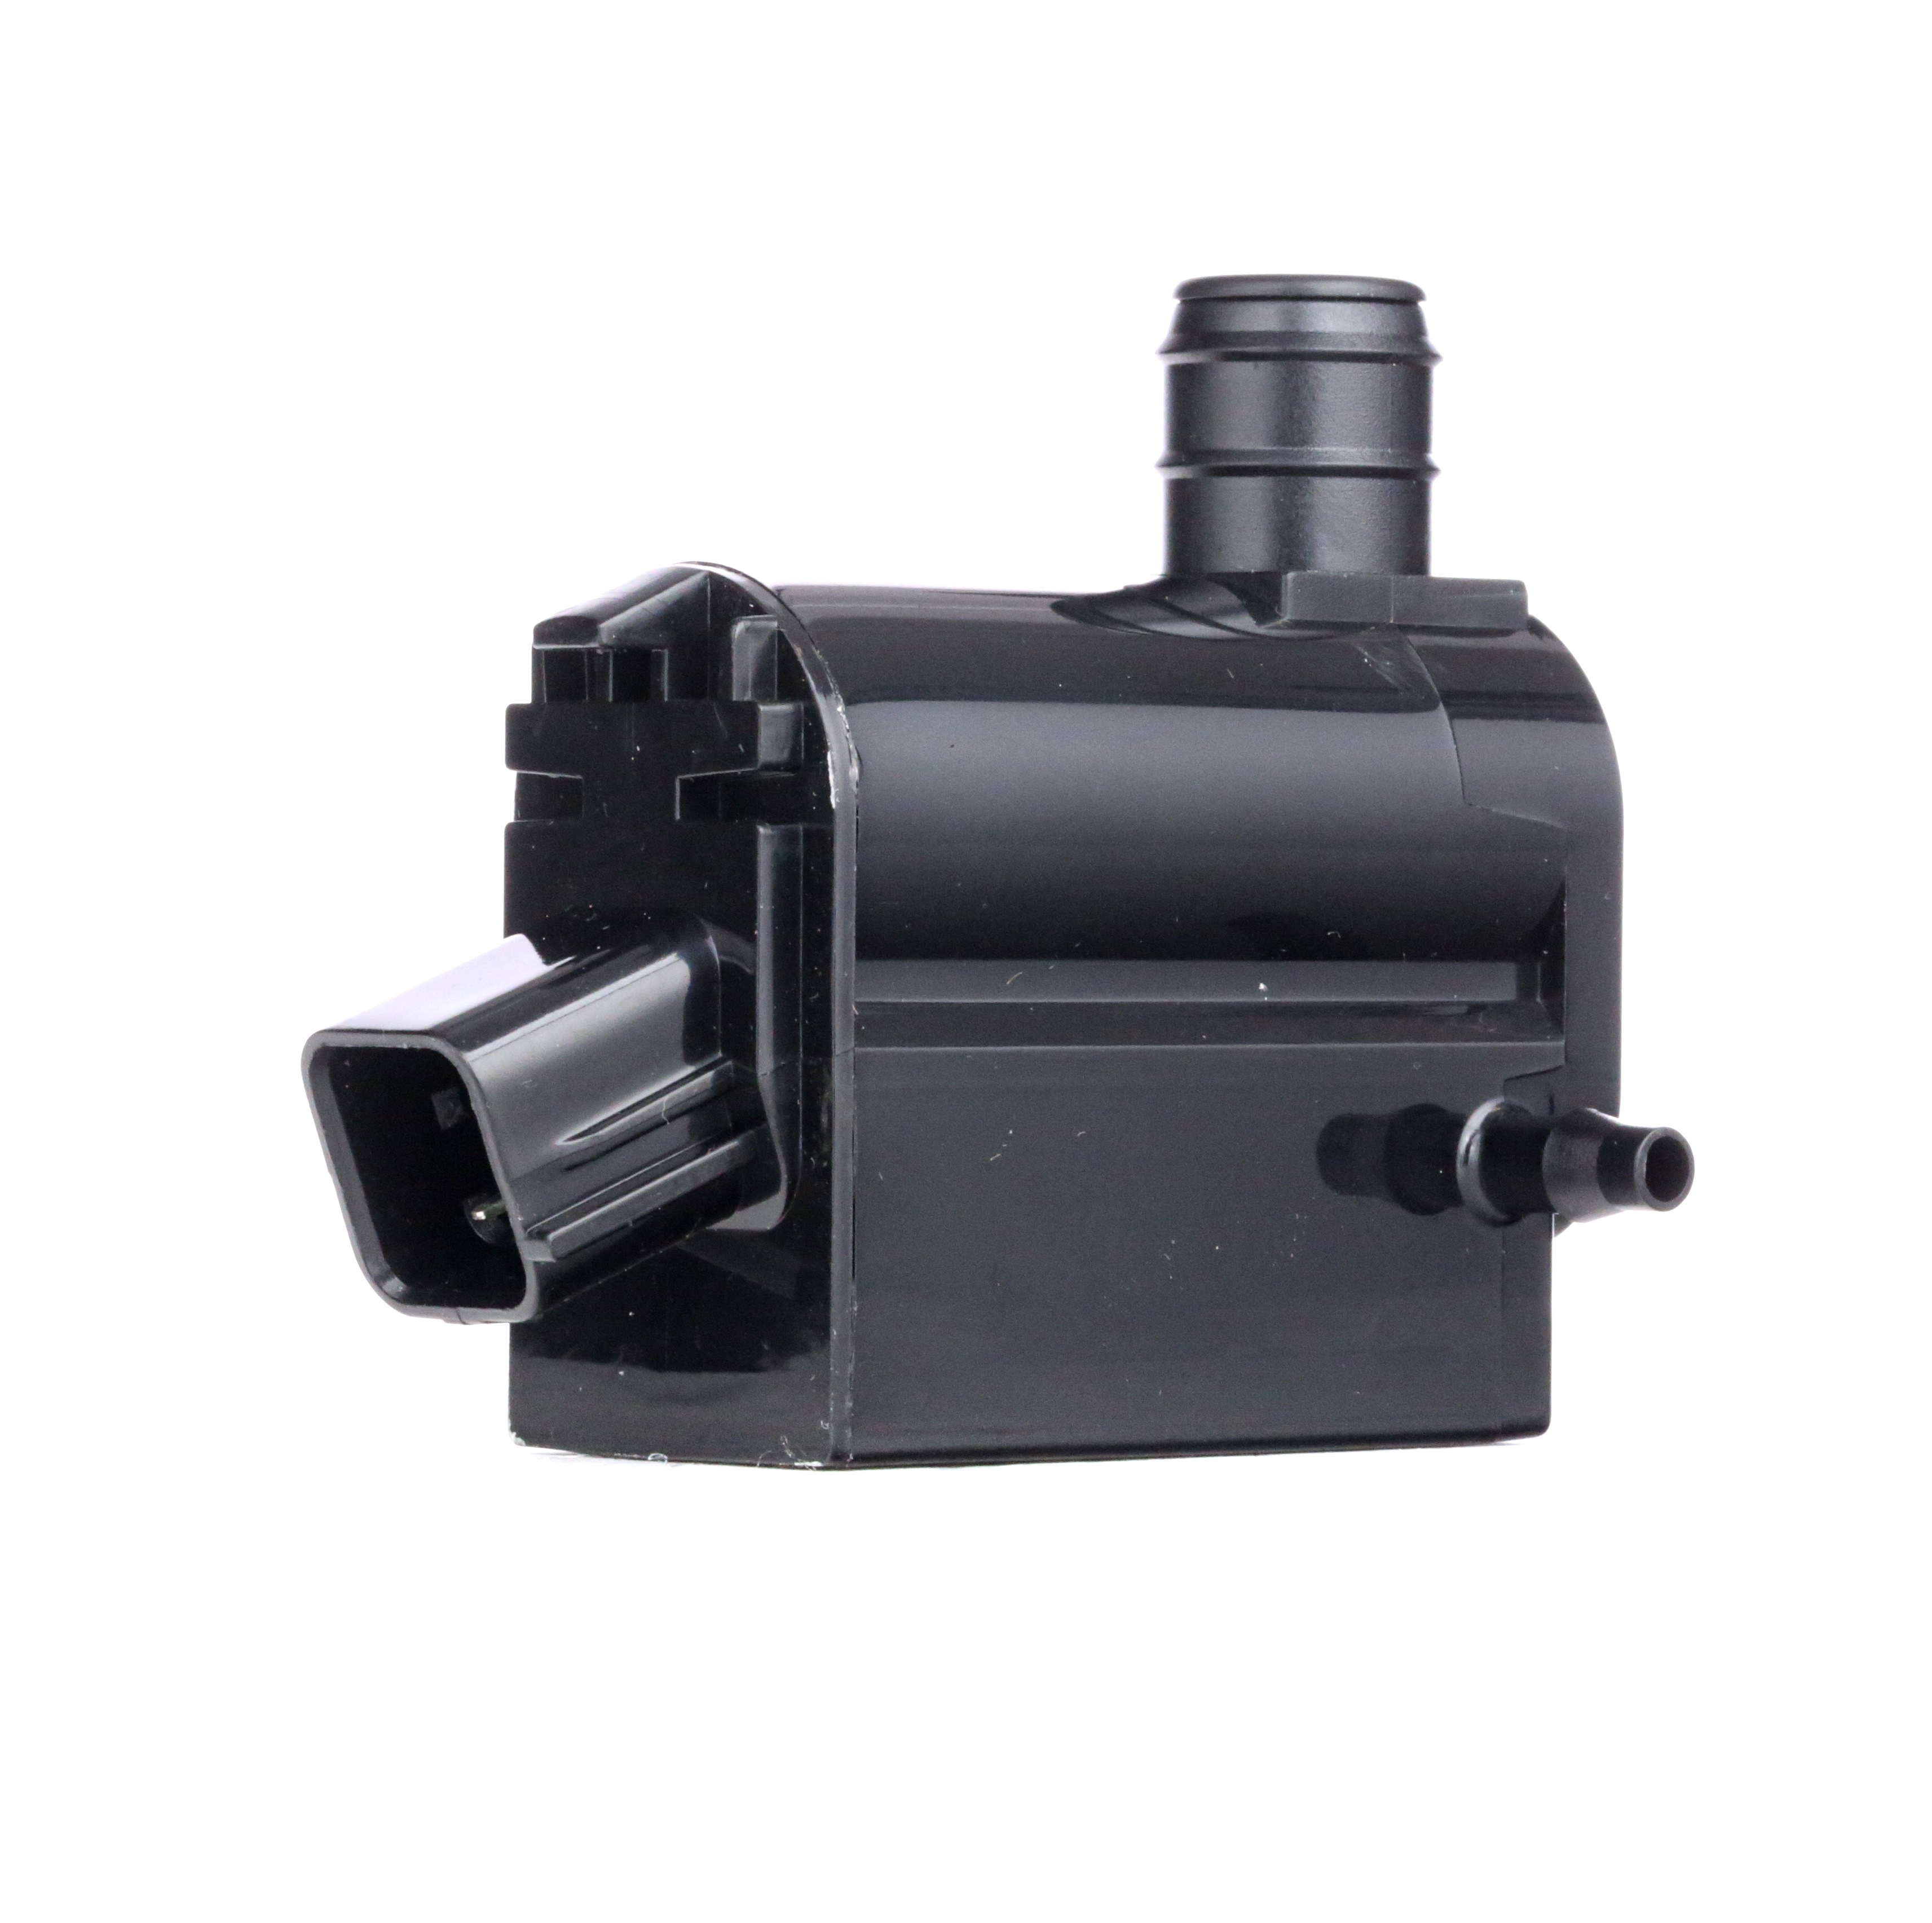 STARK SKWPC-1810007 Water Pump, window cleaning for windscreen cleaning, for rear window cleaning